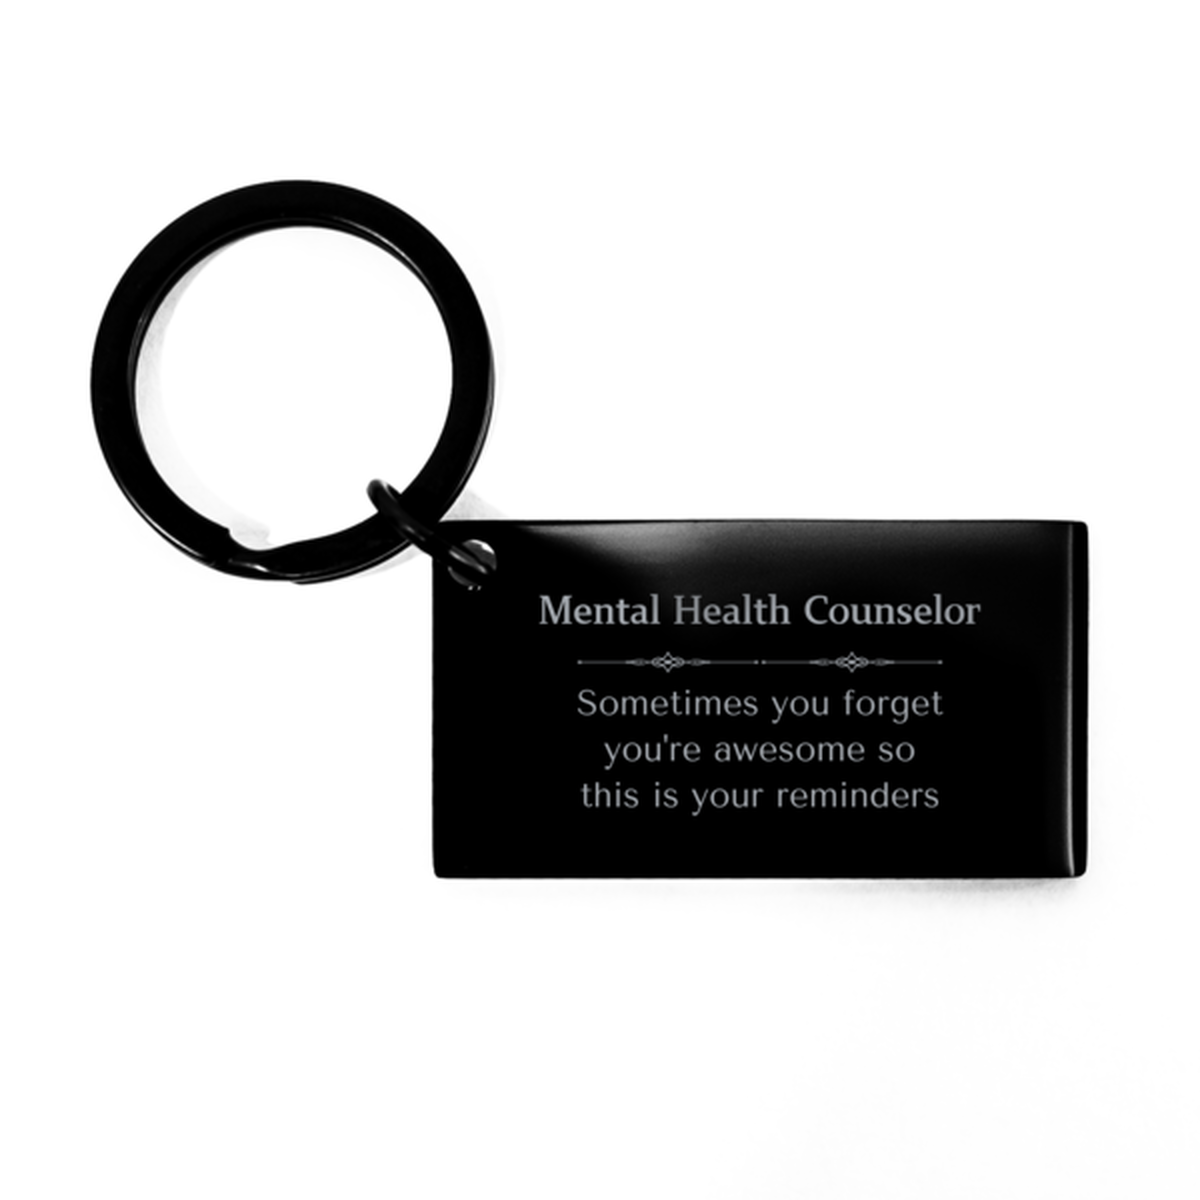 Sentimental Mental Health Counselor Keychain, Optometrist Sometimes you forget you're awesome so this is your reminders, Graduation Christmas Birthday Gifts for Mental Health Counselor, Men, Women, Coworkers